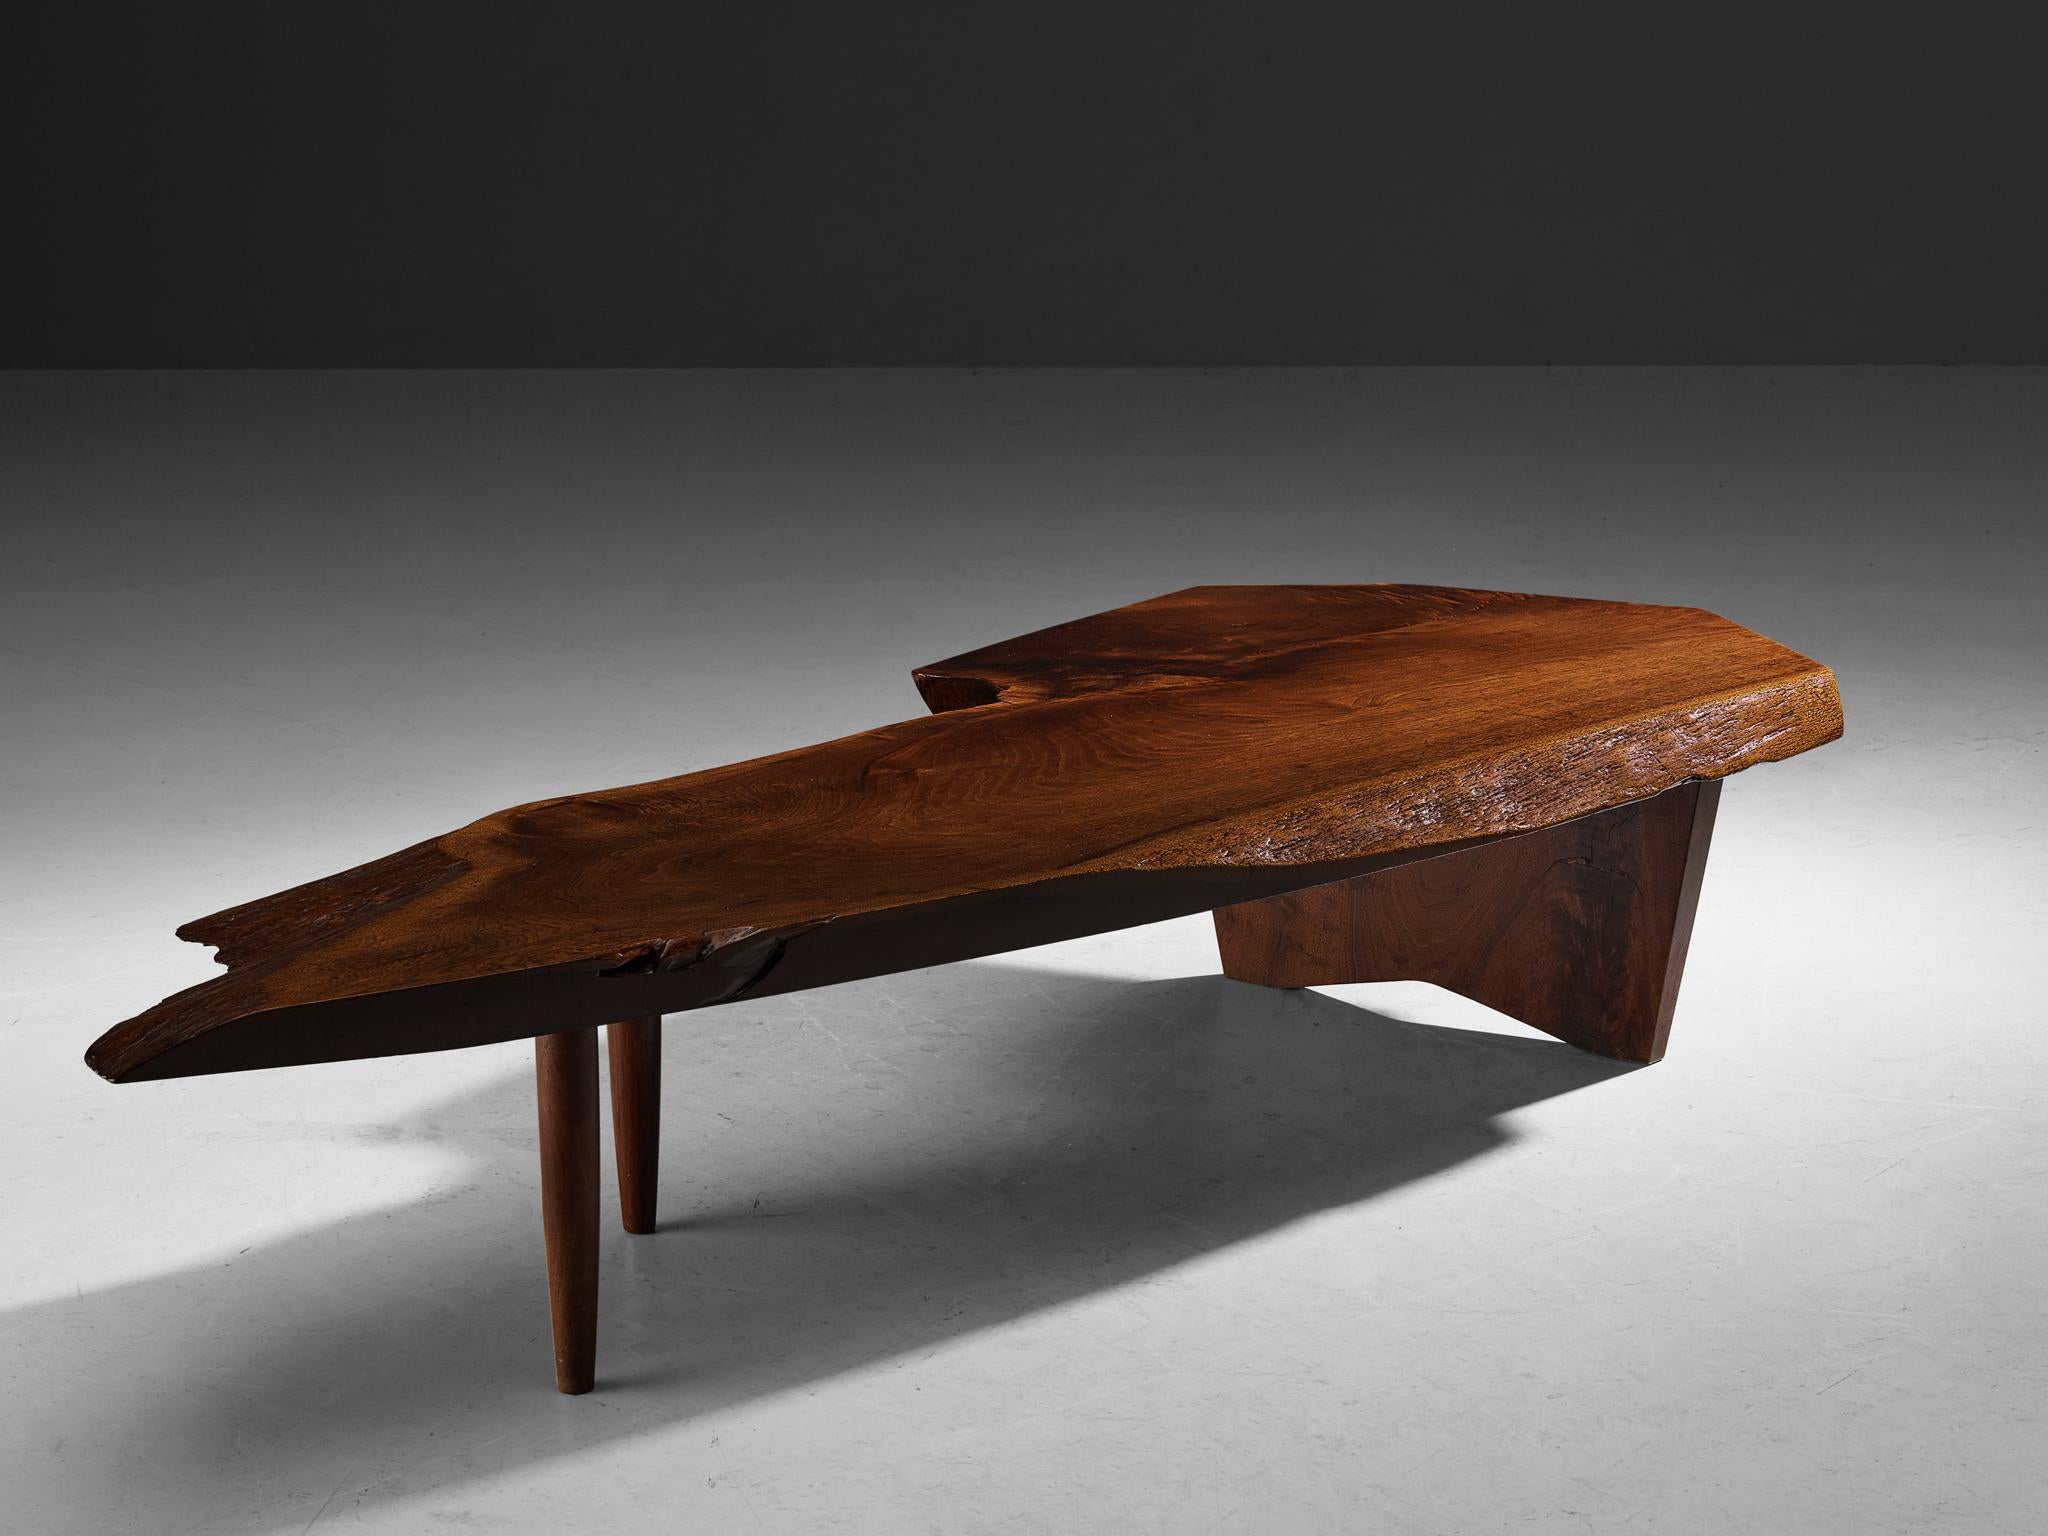 George Nakashima, free edge slab coffee table, walnut, United States, 1968

American woodworker and designer George Nakashima proves with this quintessential table that he is a true master of his craft. The impressive coffee table, created custom